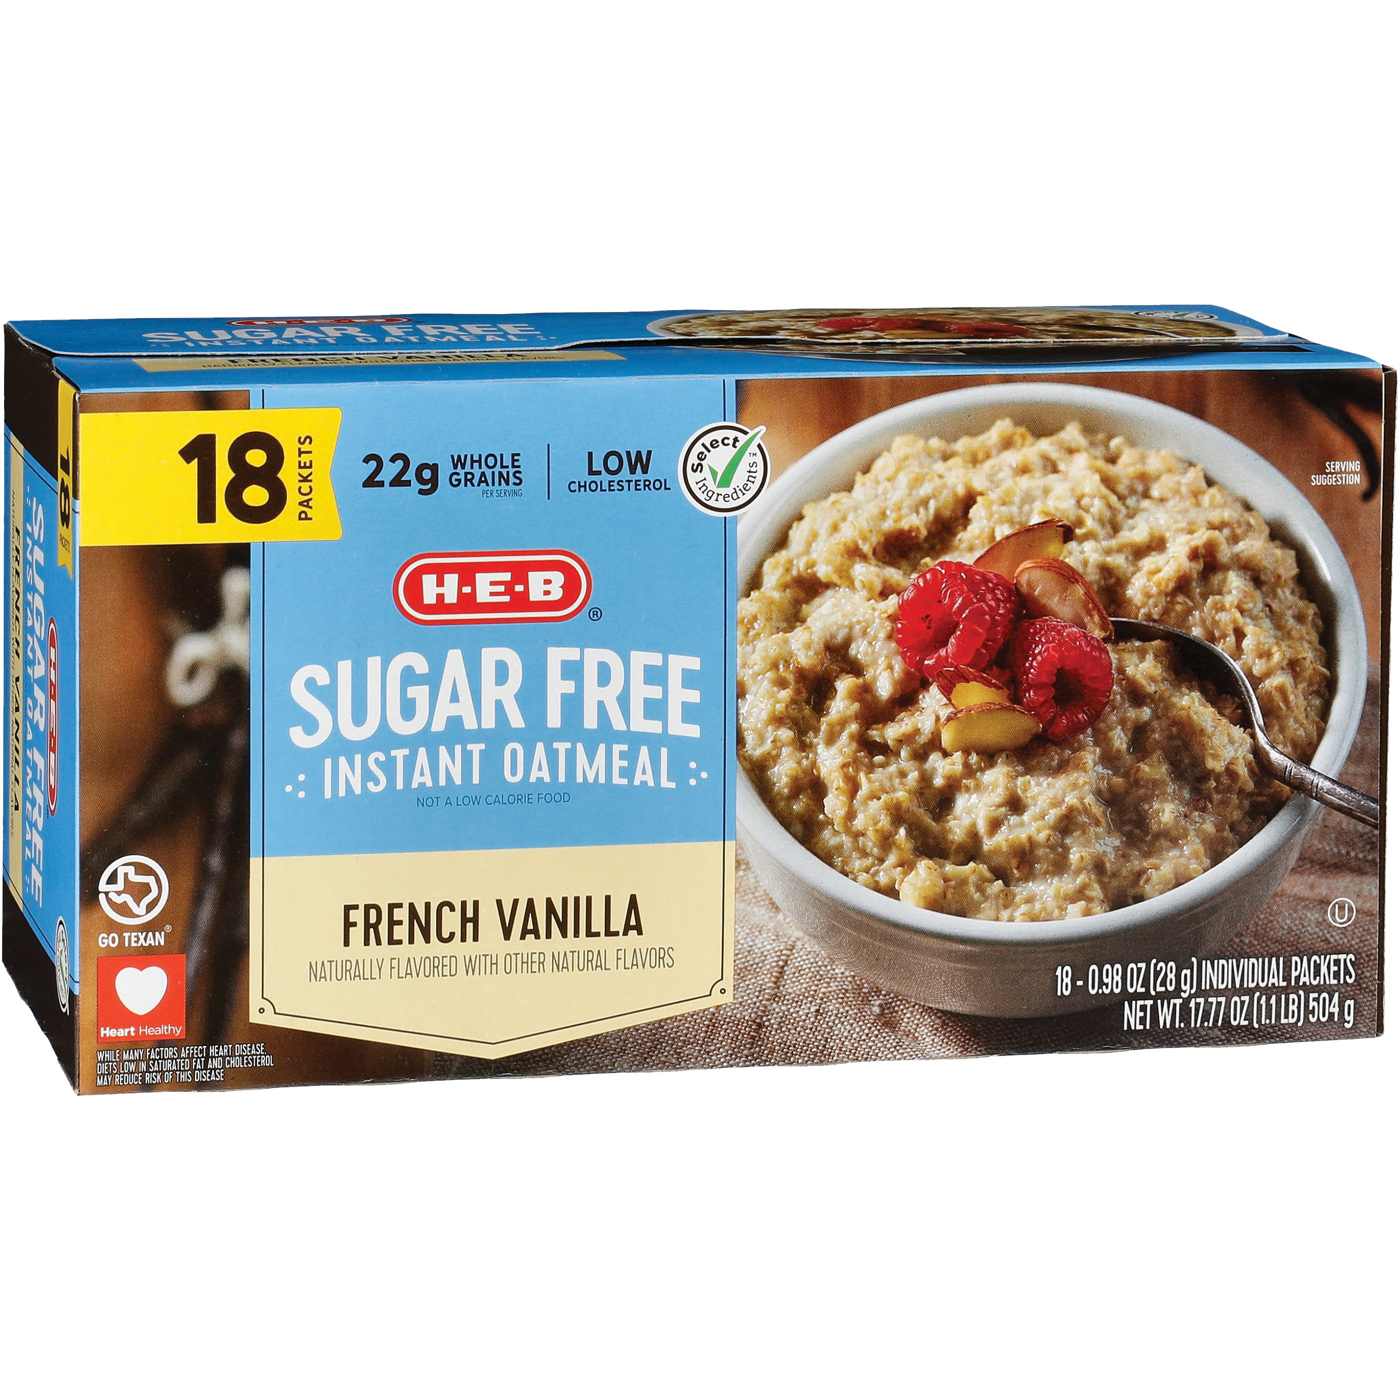 H-E-B Sugar Free Instant Oatmeal - French Vanilla; image 2 of 2